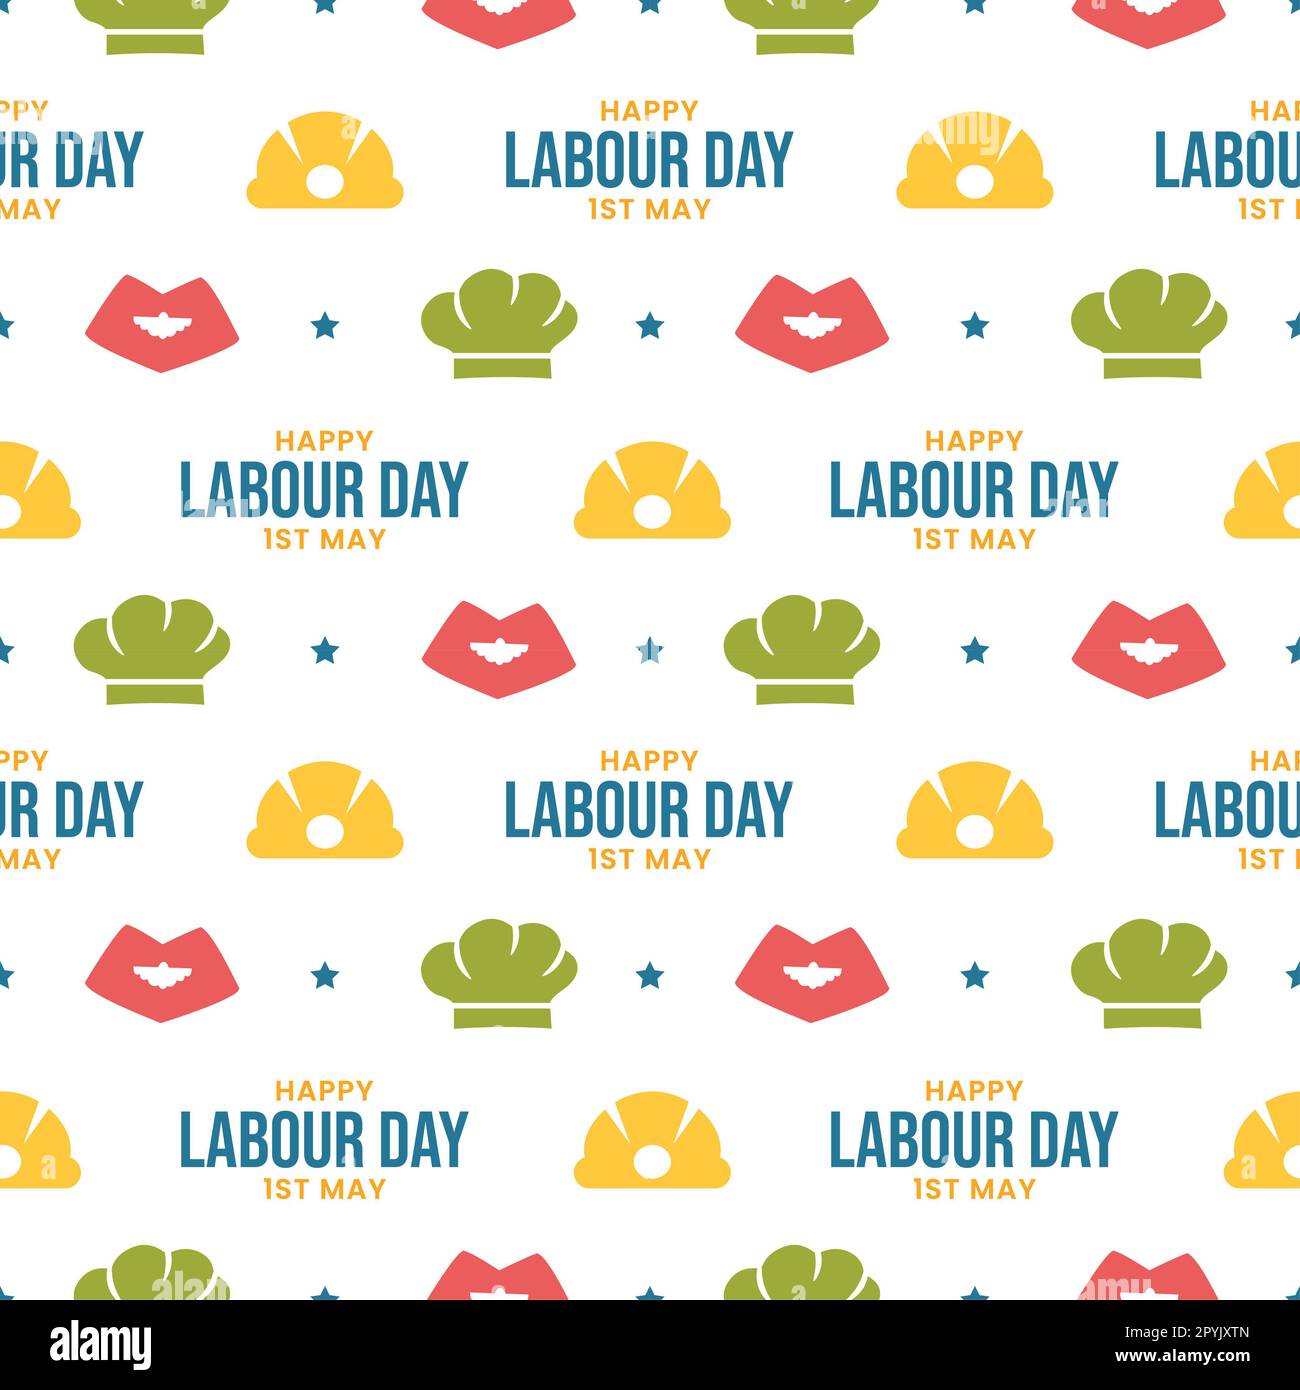 Happy Labor Day Seamless Pattern Design Illustration with Different Professions in Template Hand Drawn Stock Photo